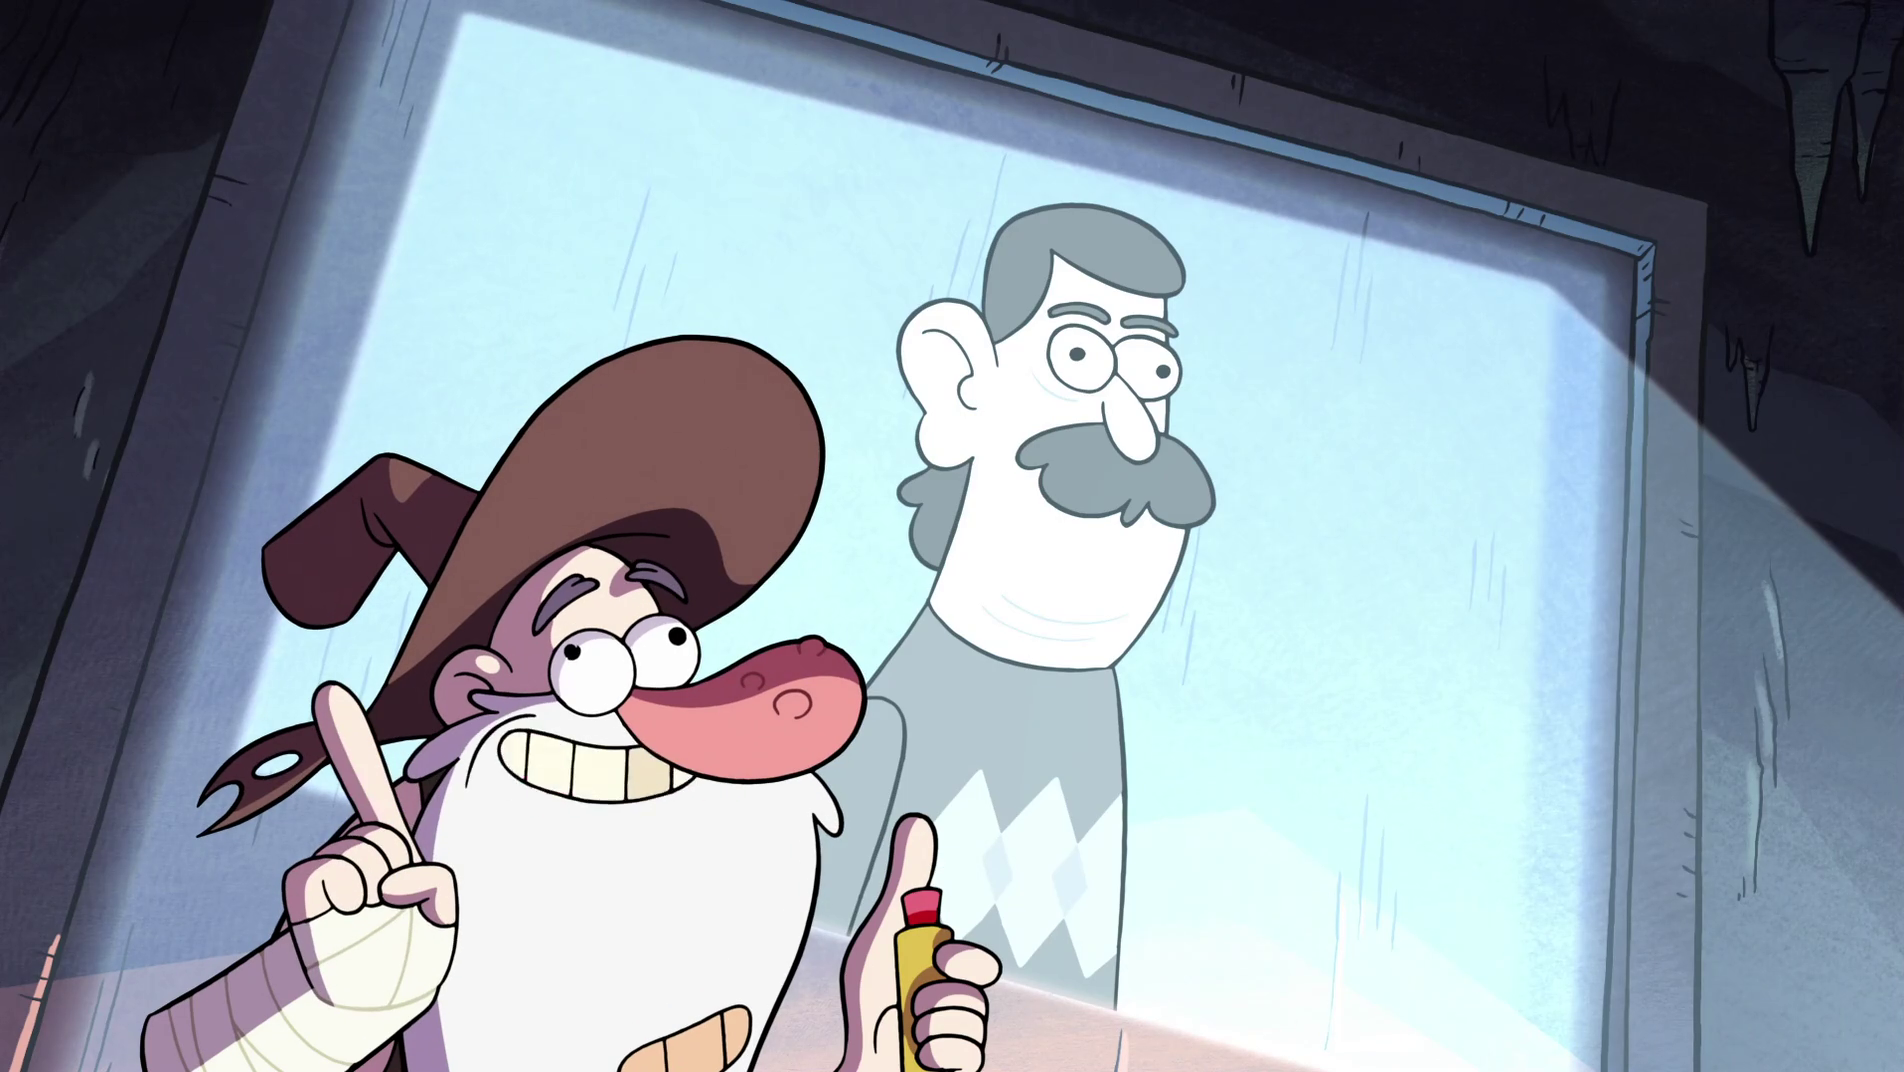 https://static.wikia.nocookie.net/gravityfalls/images/7/7d/S1e2_ernie.png/revision/latest/scale-to-width-down/1904?cb=20160203202153